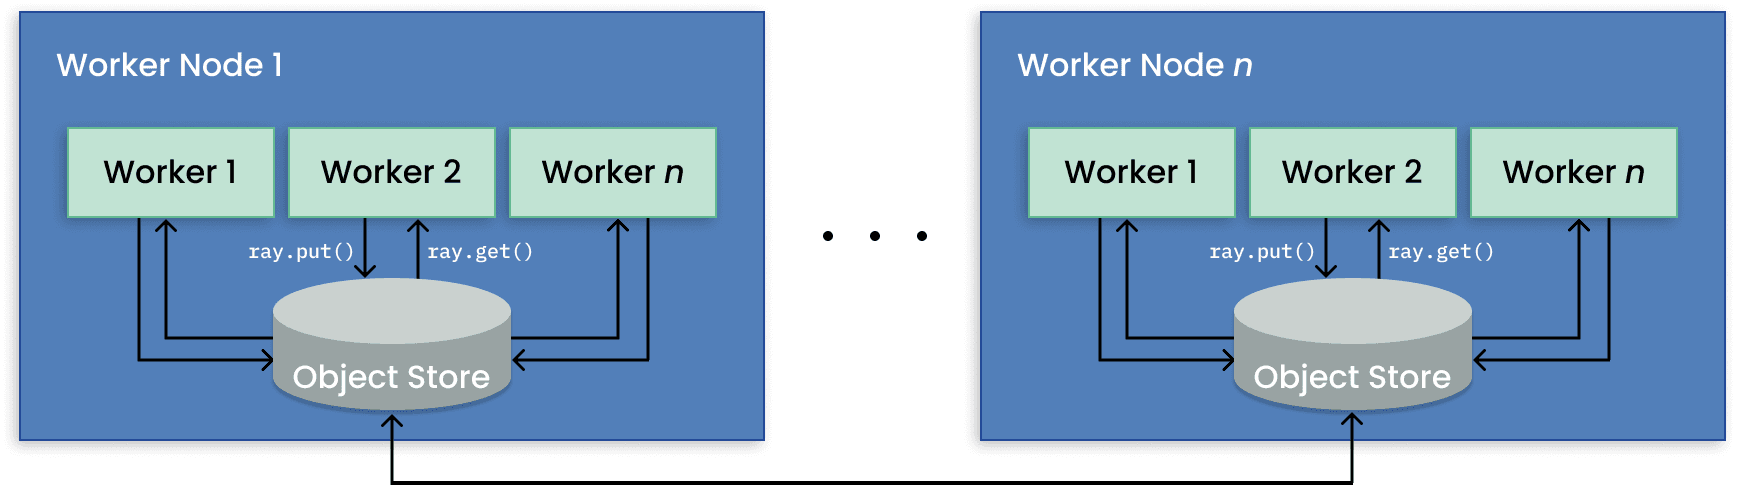 Diagram of workers in worker nodes using ray.put() to store values and using ray.get() to retrieve them from each node's object store.